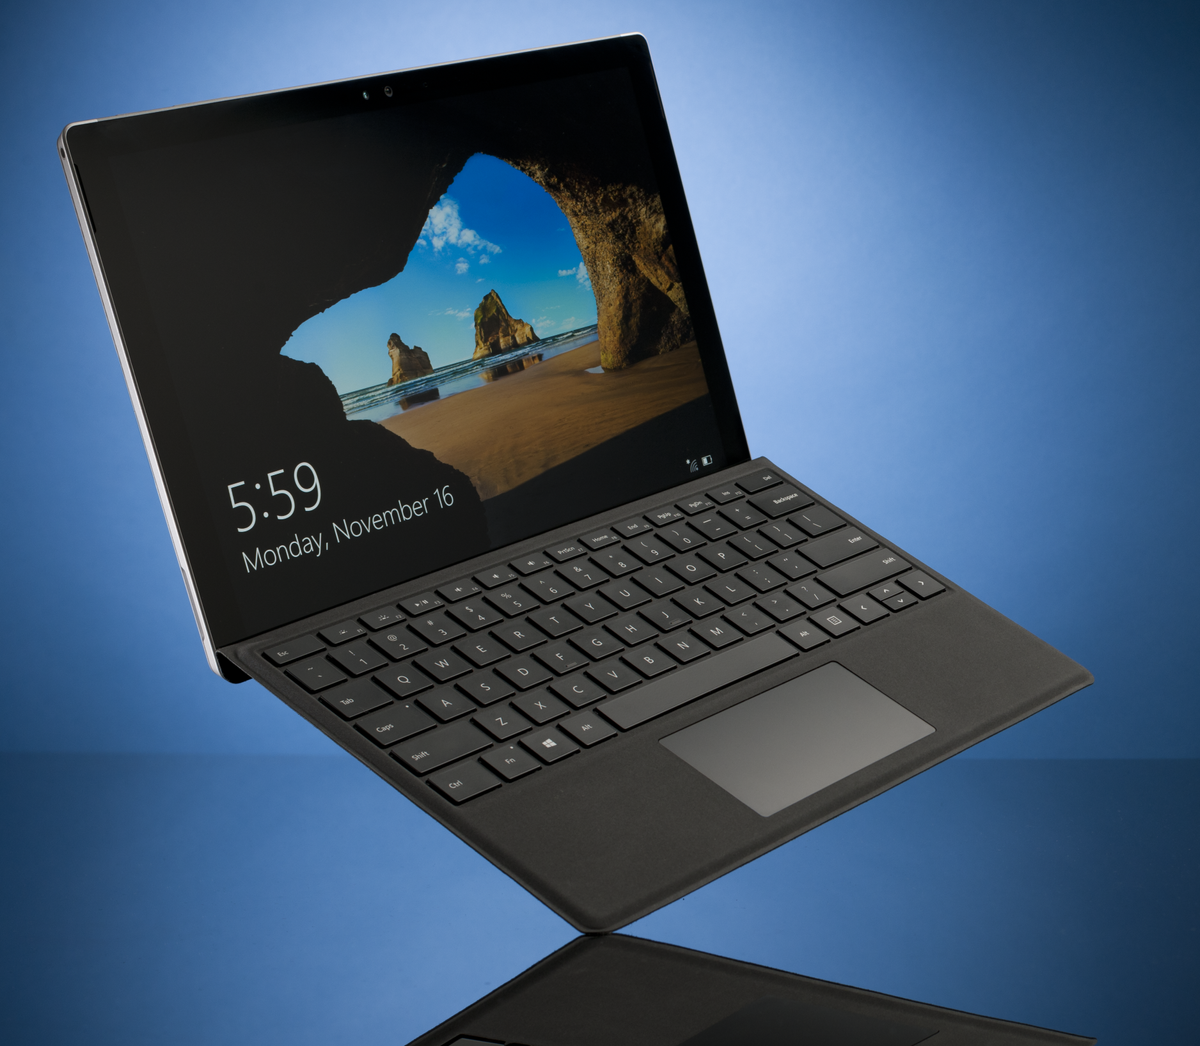 Microsoft Is Replacing Some Surface Pro 4 With Touch Screen Issues Mspoweruser